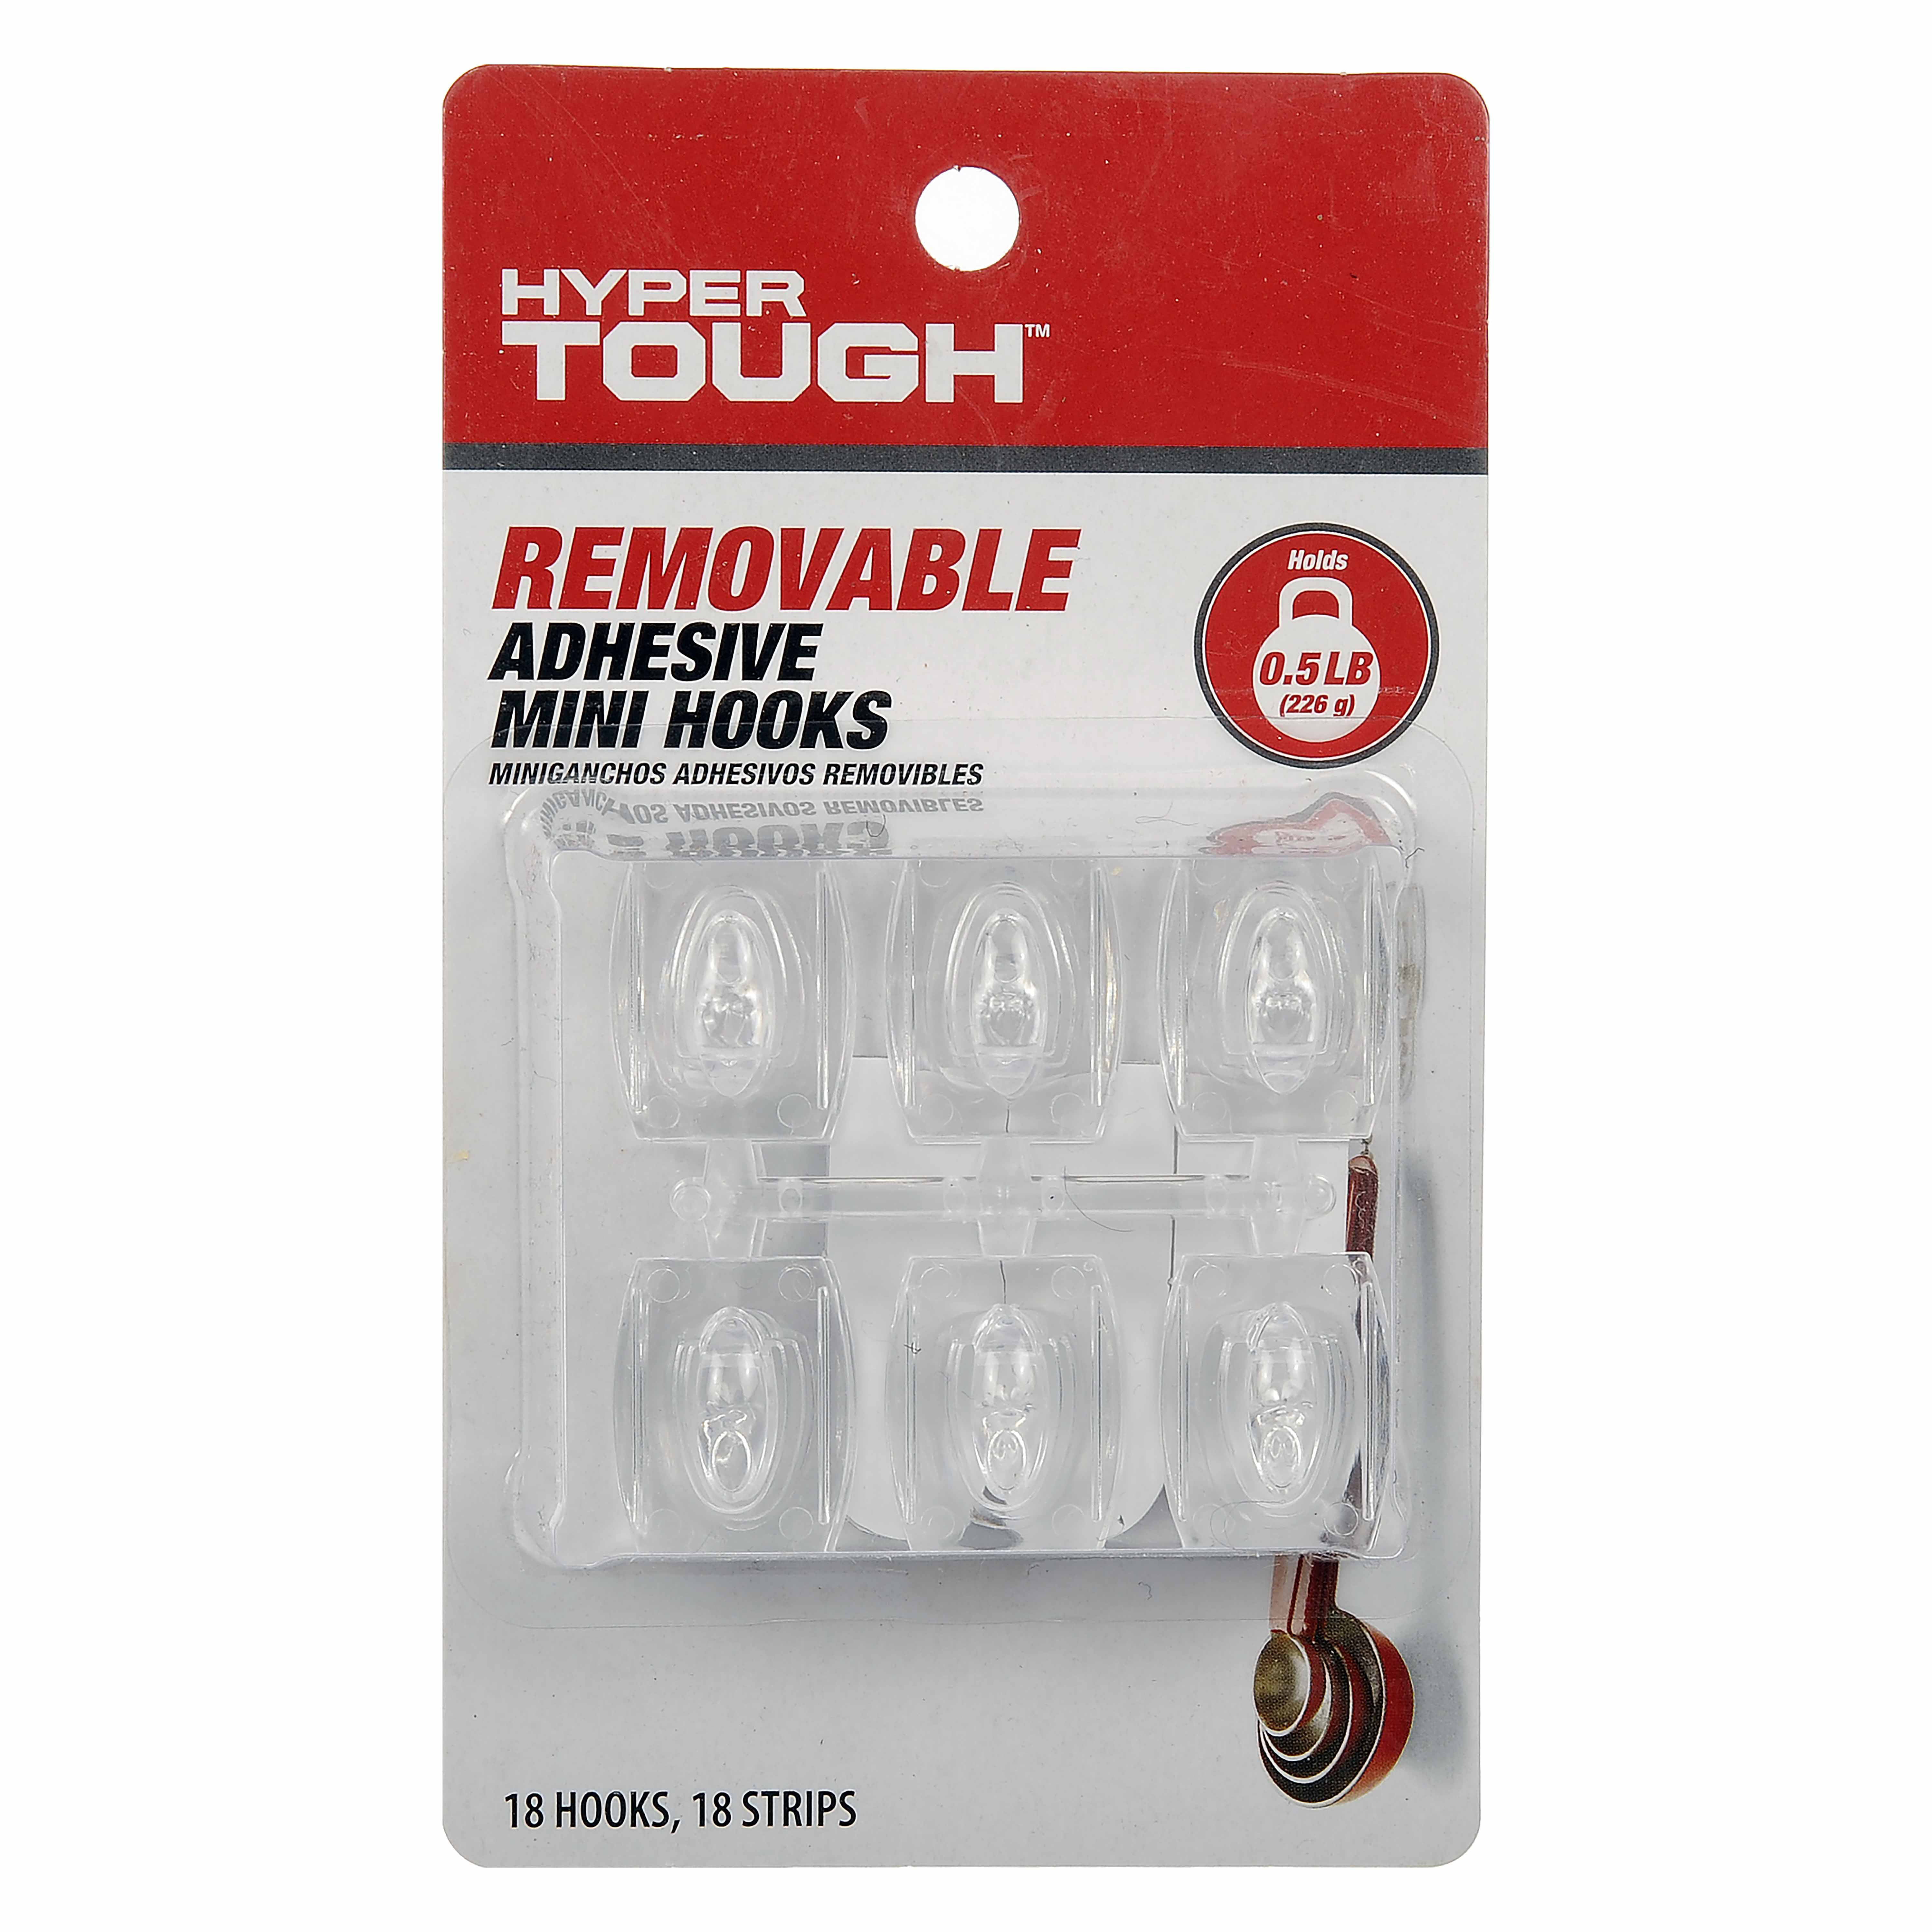 Hyper Tough, Mini Removable Hooks Value Pack, 18 Clear Square Mini Hooks  and Adhesive Strips, Hold .5LB - DroneUp Delivery